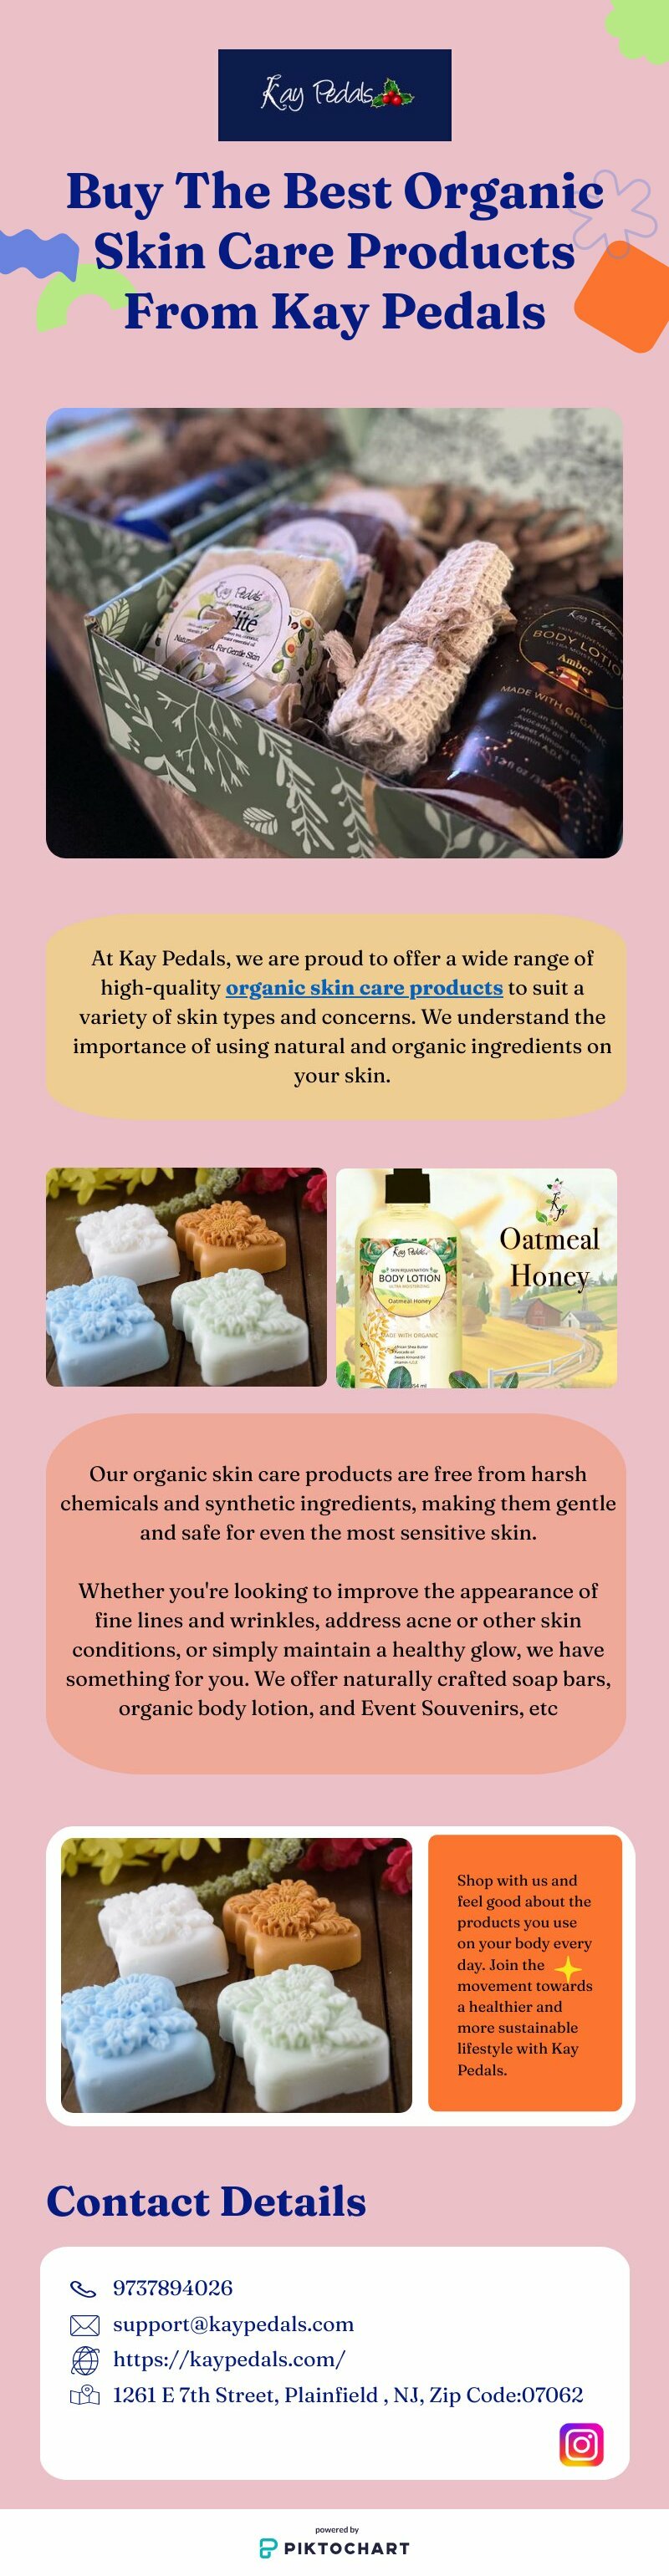 Buy The Best Organic Skin Care Products From Kay Pedals